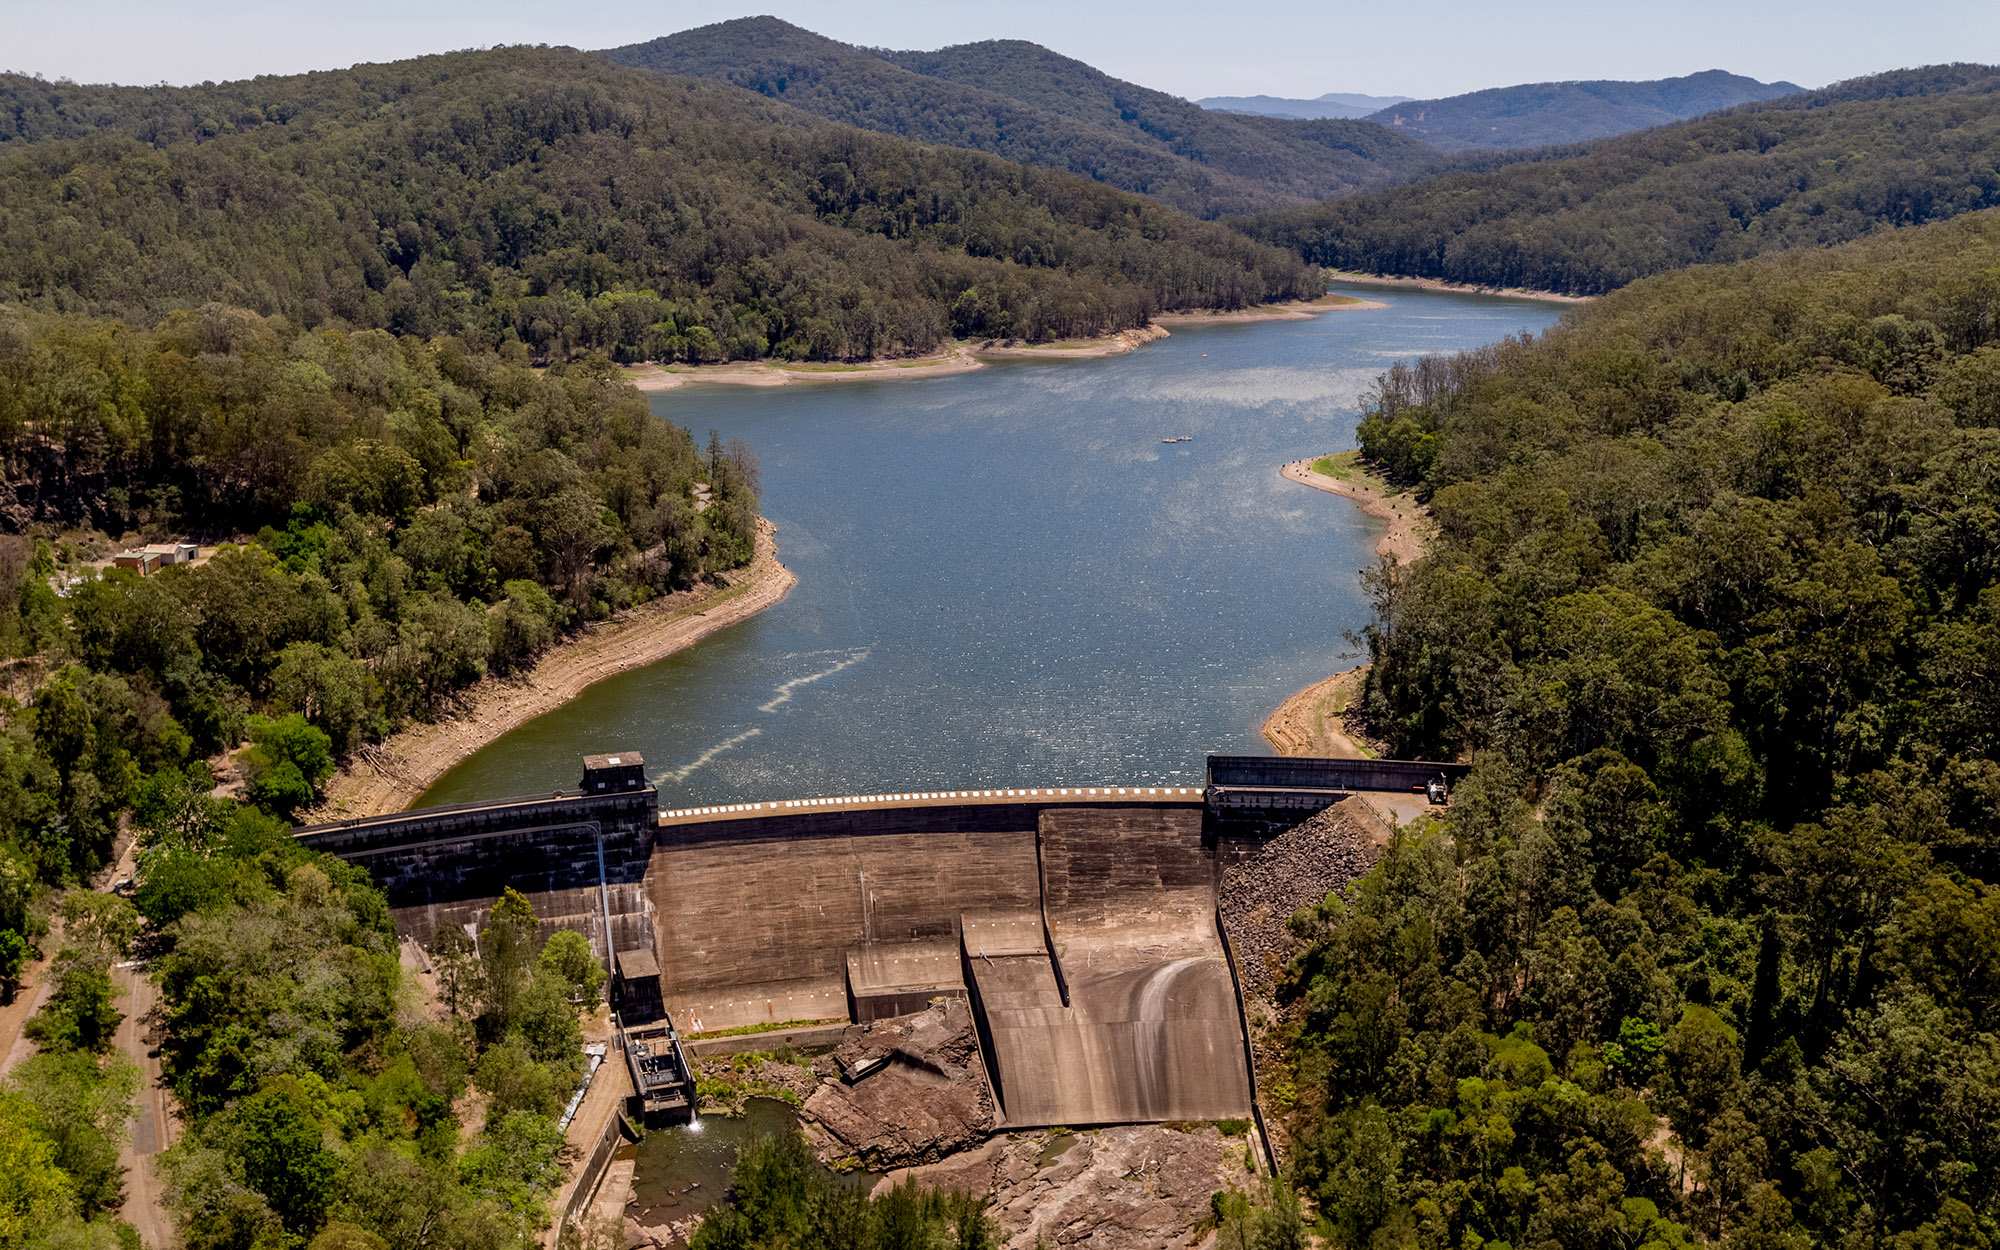 View of Chichester Dam from drone.